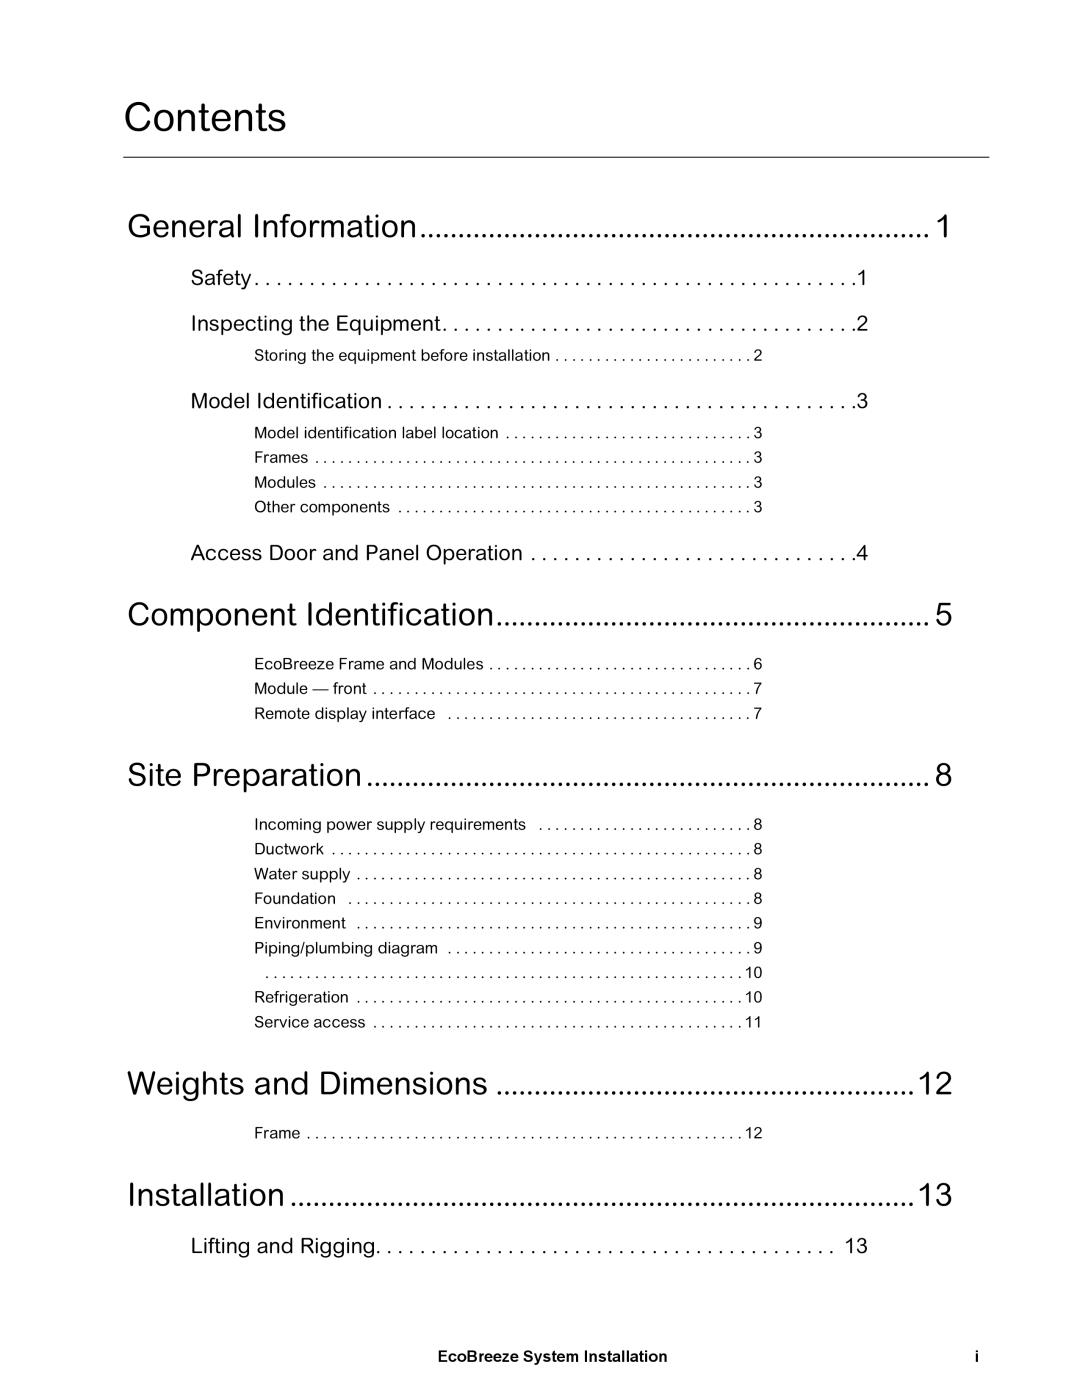 Schneider Electric ACECFR40101SE Contents, Weights and Dimensions, General Information, Component Identification 